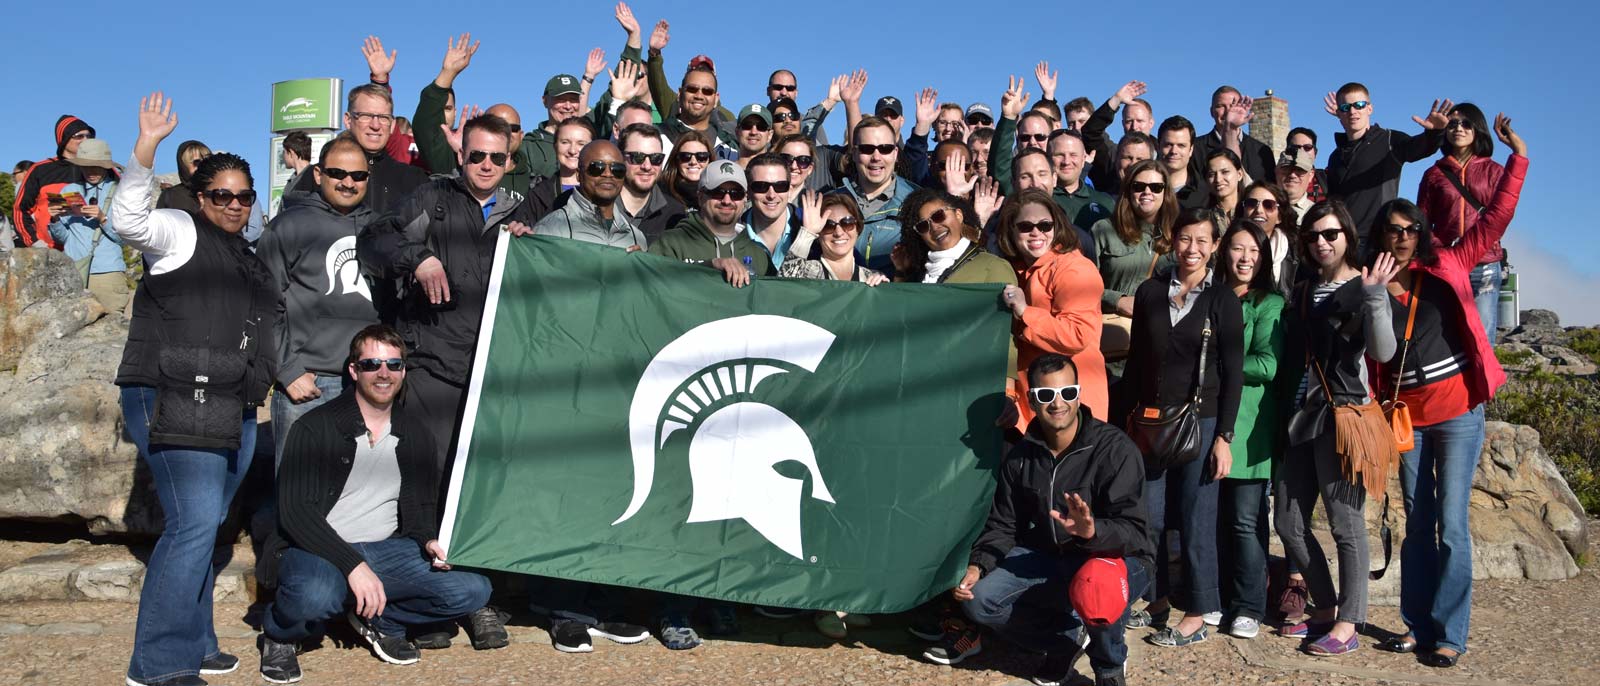 Large group of Michigan State Executive MBA students stand with MSU Spartan Helmet flag on sand in South Africa